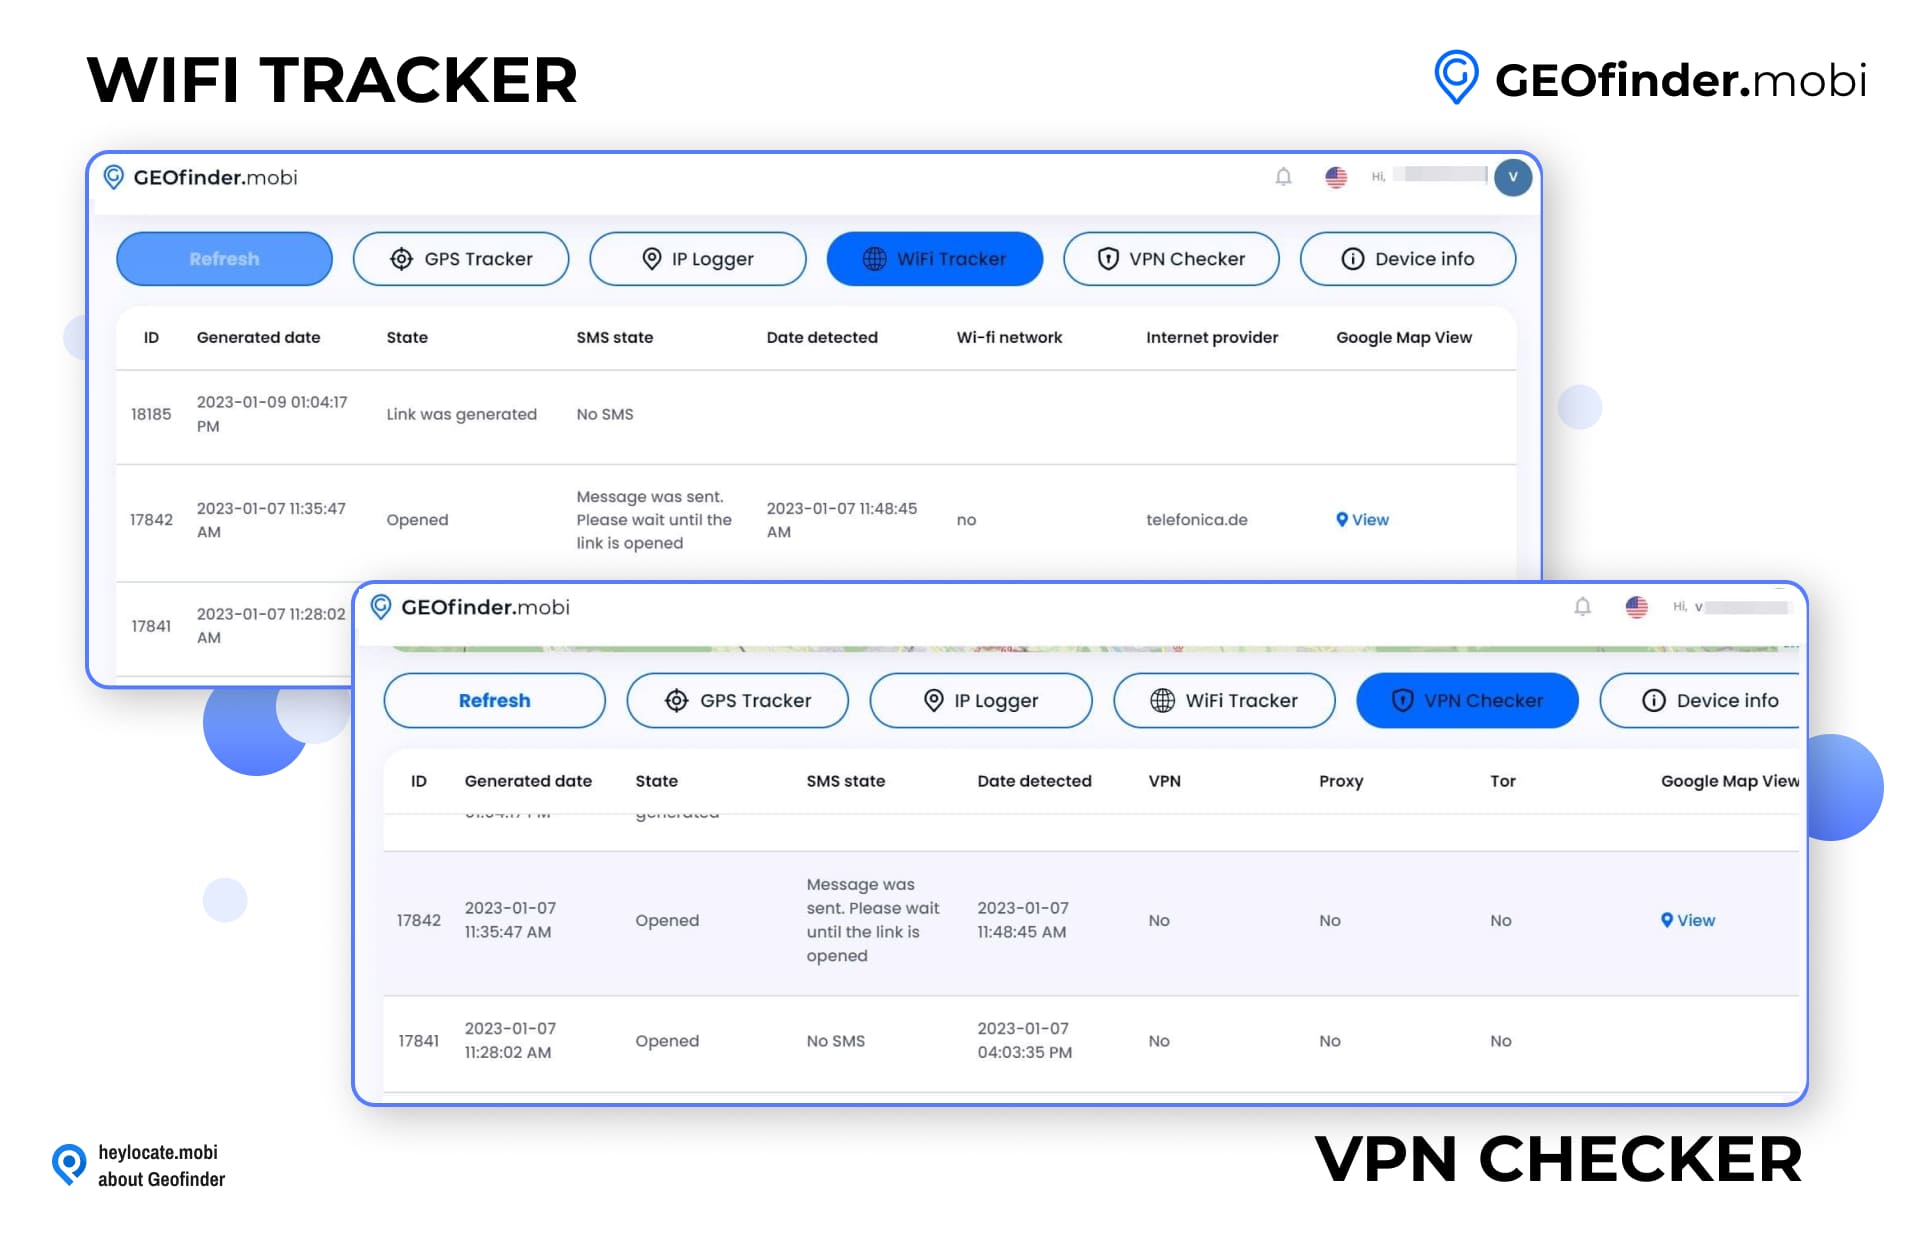 Interface of GEOfinder.mobi showing WiFi Tracker and VPN Checker tabs, with detailed listings of ID numbers, dates, SMS states, date detected, and network information for tracking purposes.